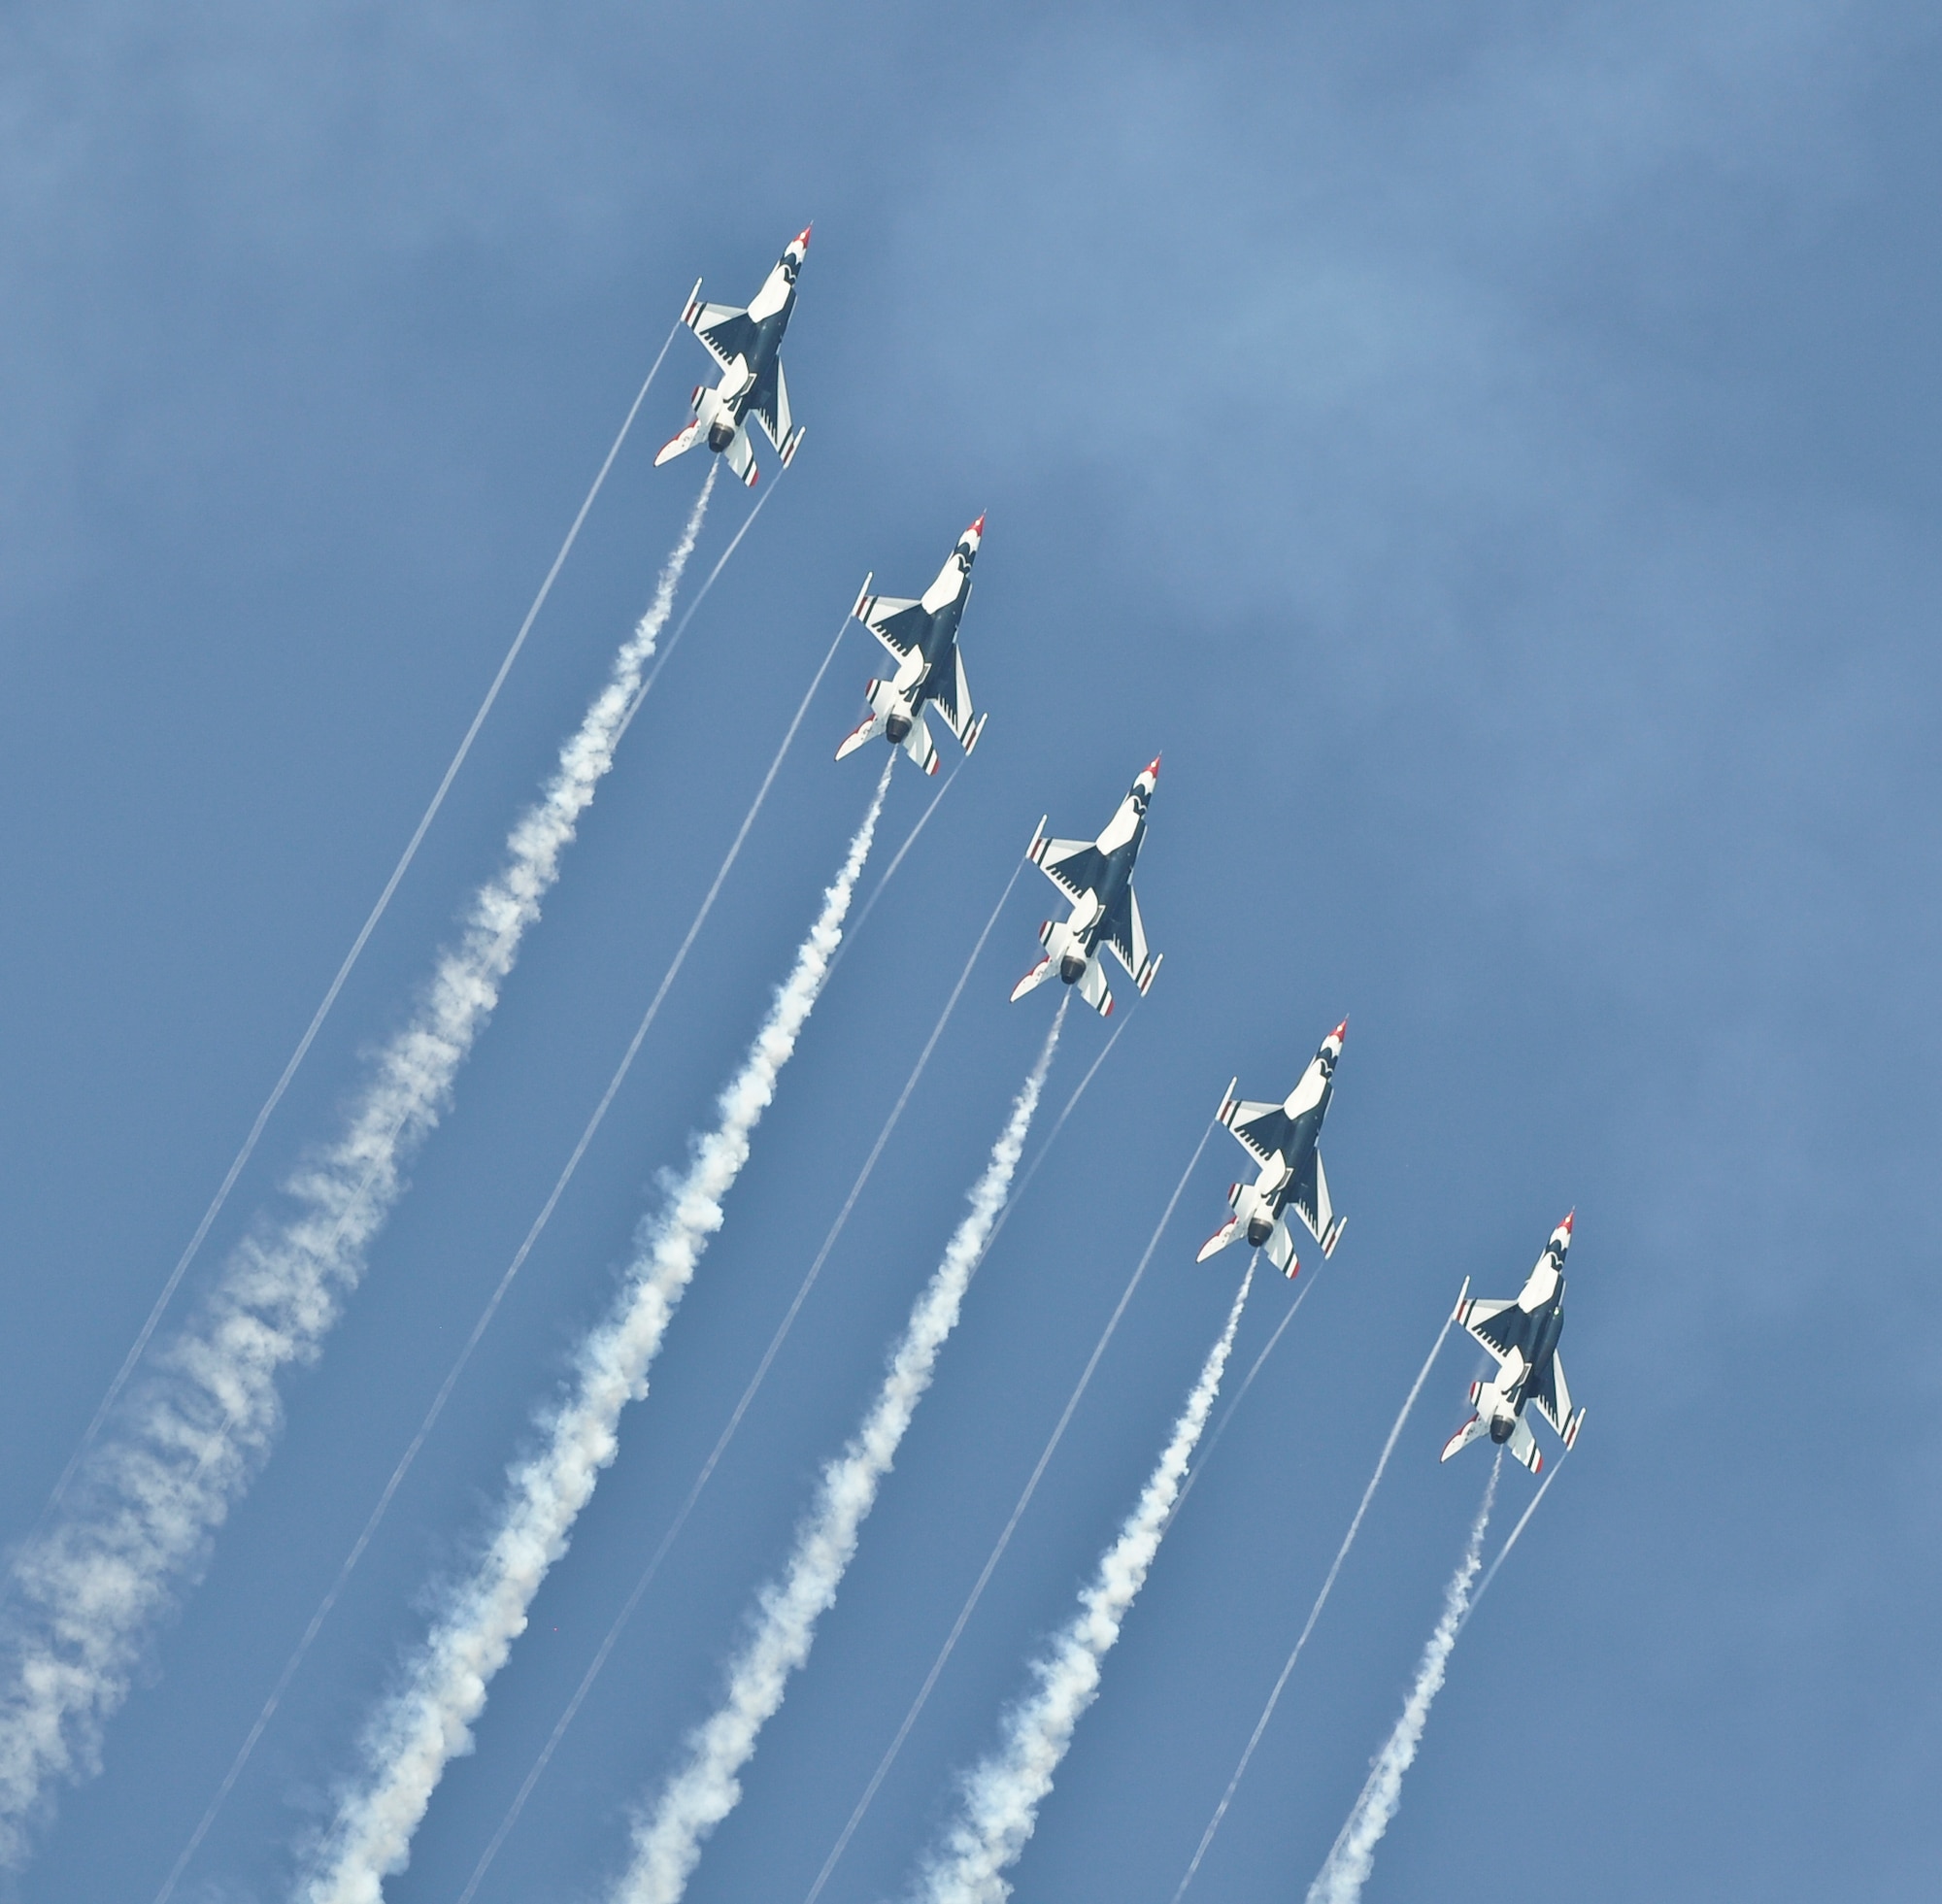 The Air Force Thunderbirds Air Demonstration Team performs a signature move during the 2011 Milwaukee Air and Water Show on Saturday, August 6.  The distinctively painted F-16C Falcons are assigned to Nellis Air Force Base, Las Vegas, Nevada, and they perform 70 shows per year in both the United States and abroad.  (U.S. Air Force photo by Staff Sgt. Jeremy Wilson / Released)